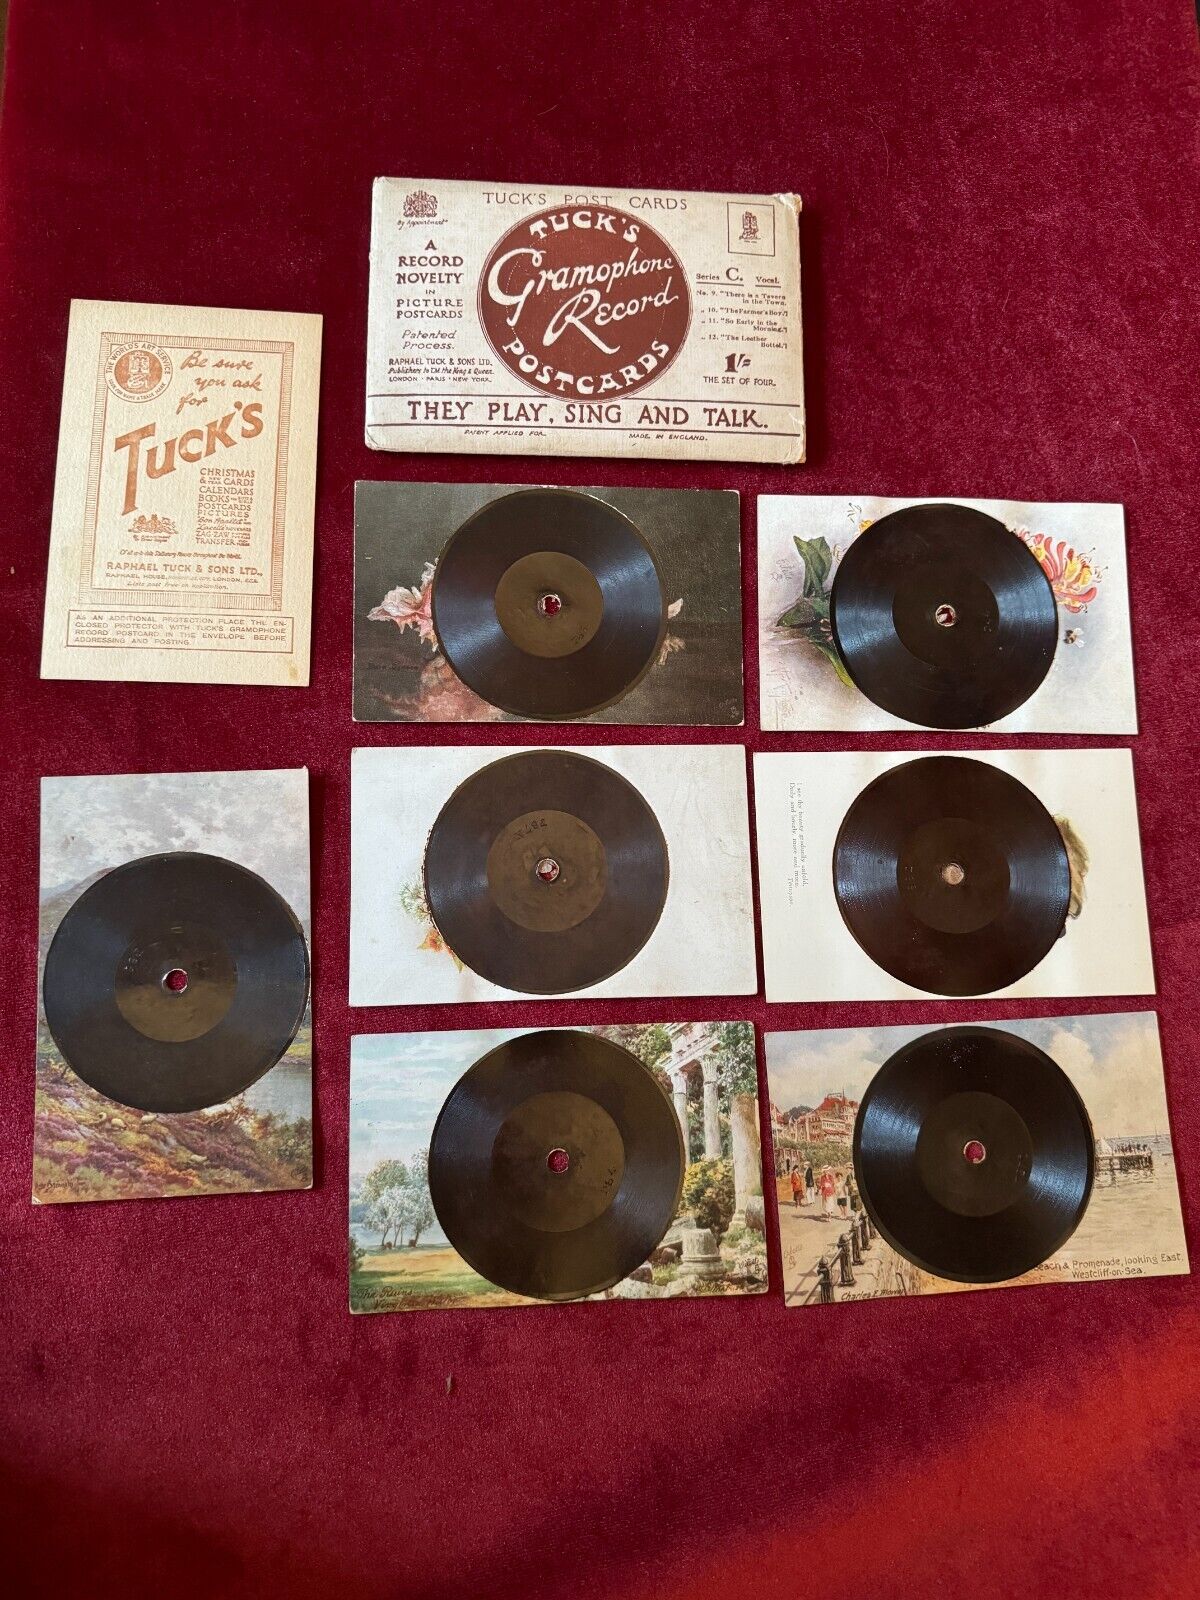 78 Rpm Set Of 7 Tuck's Postcard Records with Original Envelope and Inner notes